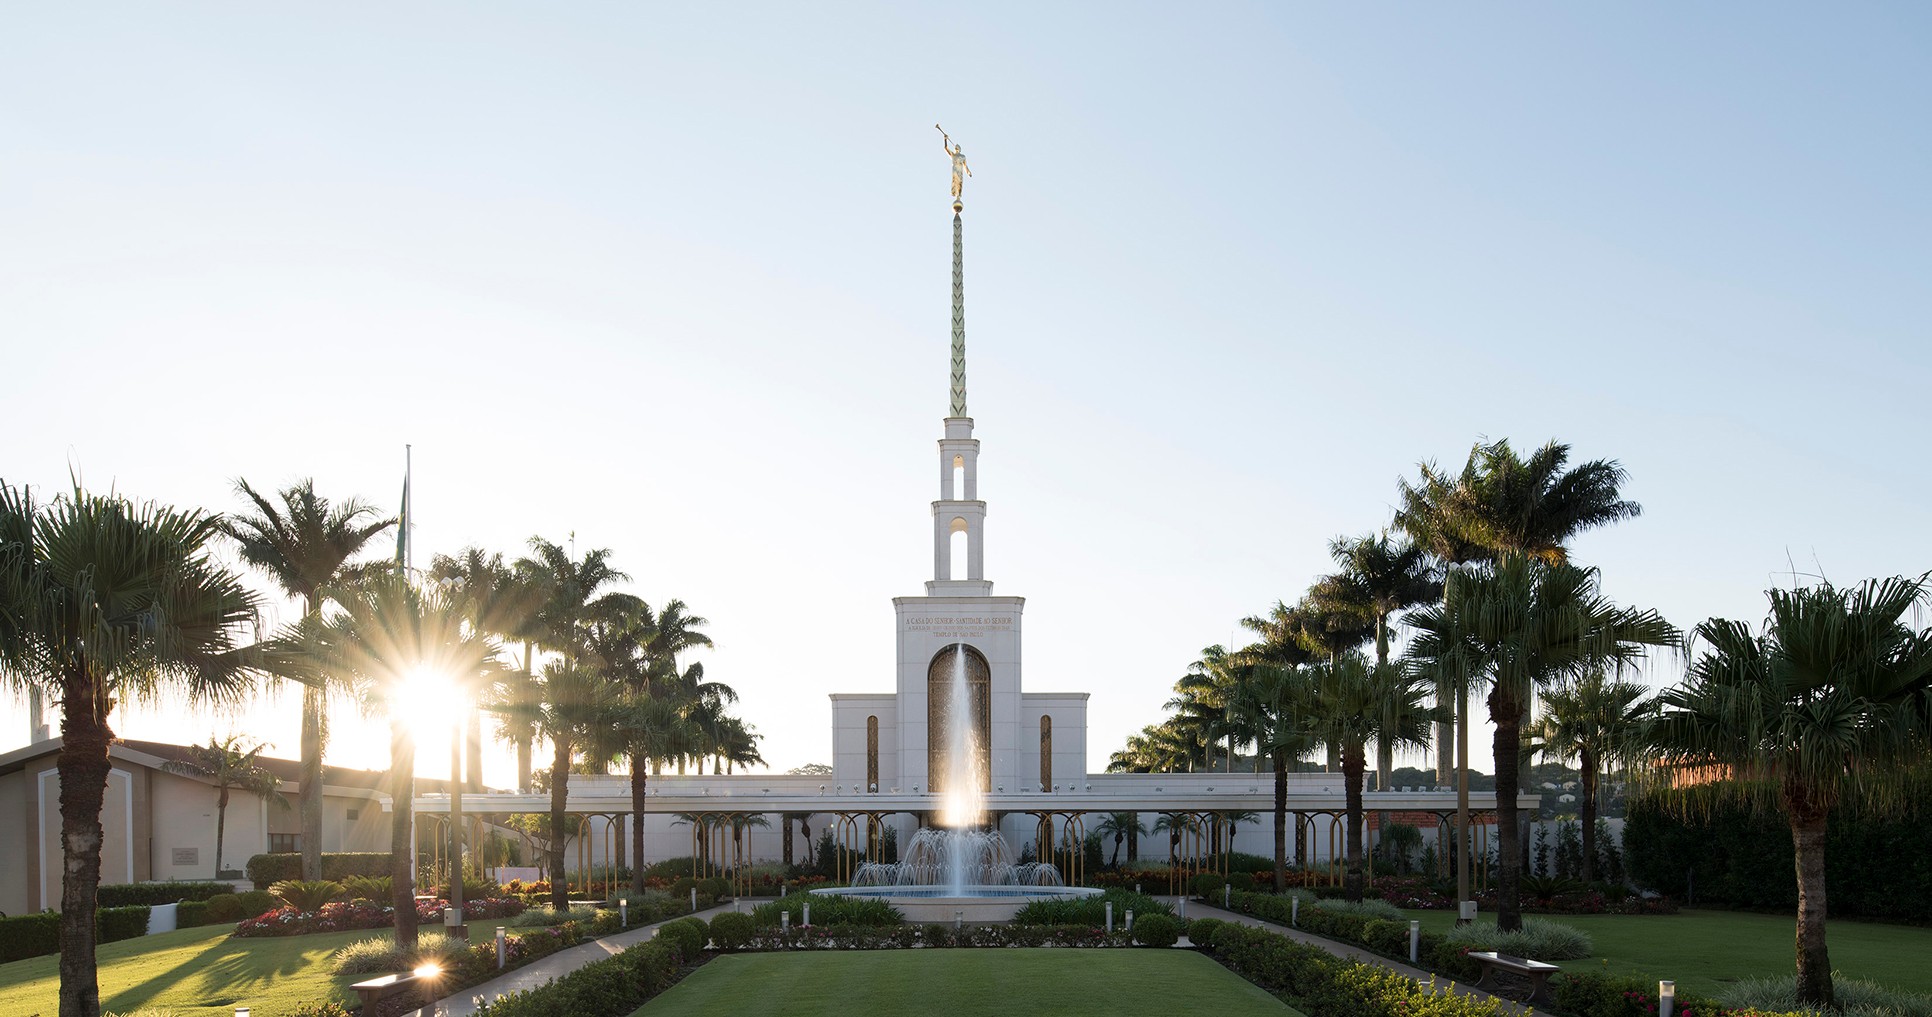 Exterior of the São Paulo Brazil Temple. Photos taken during the day.